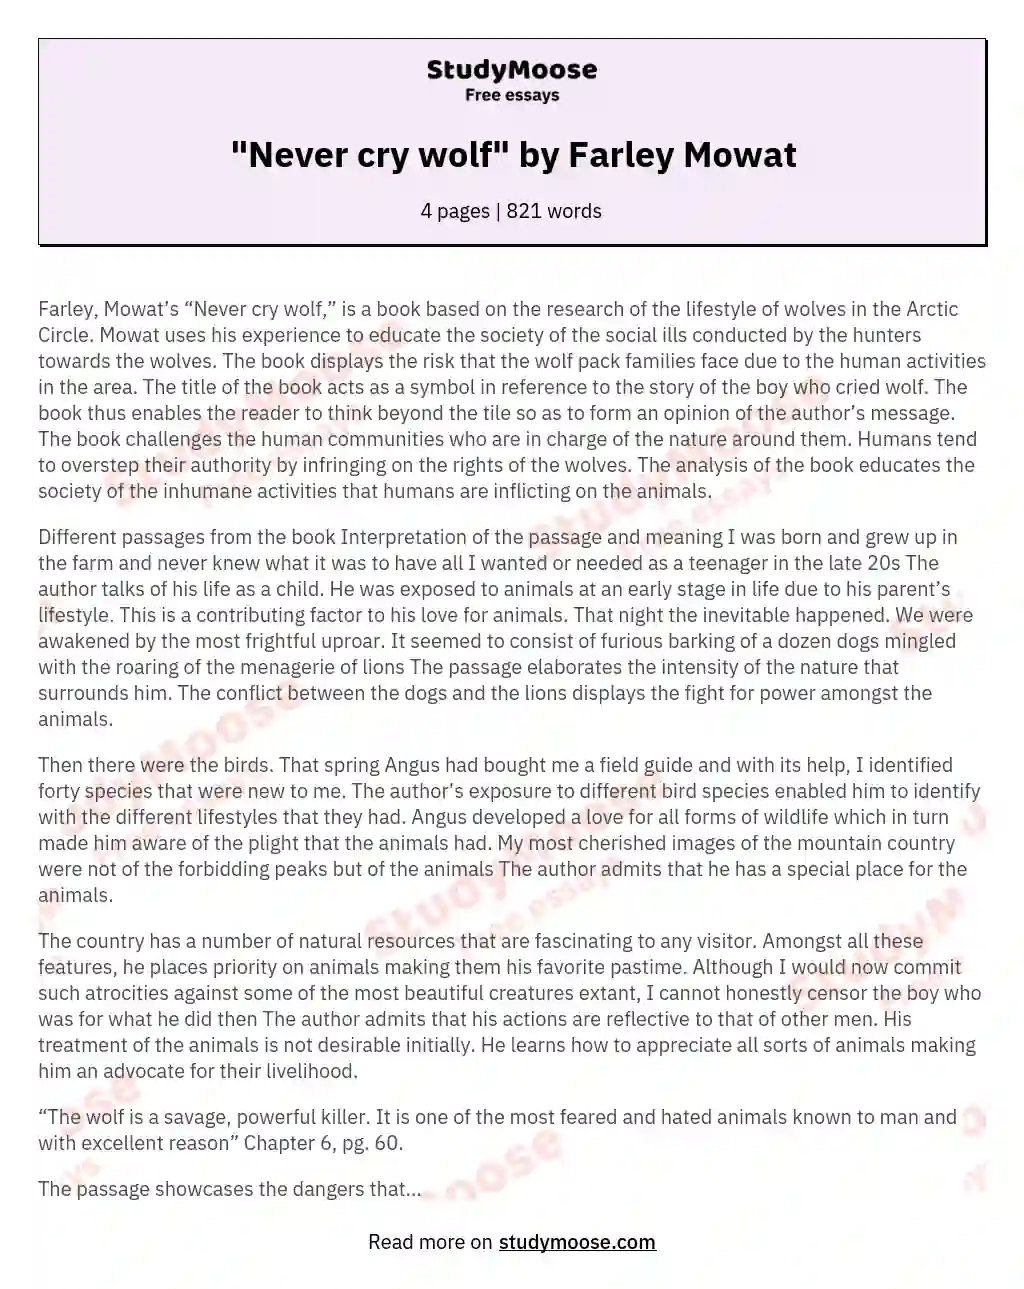 "Never cry wolf" by Farley Mowat